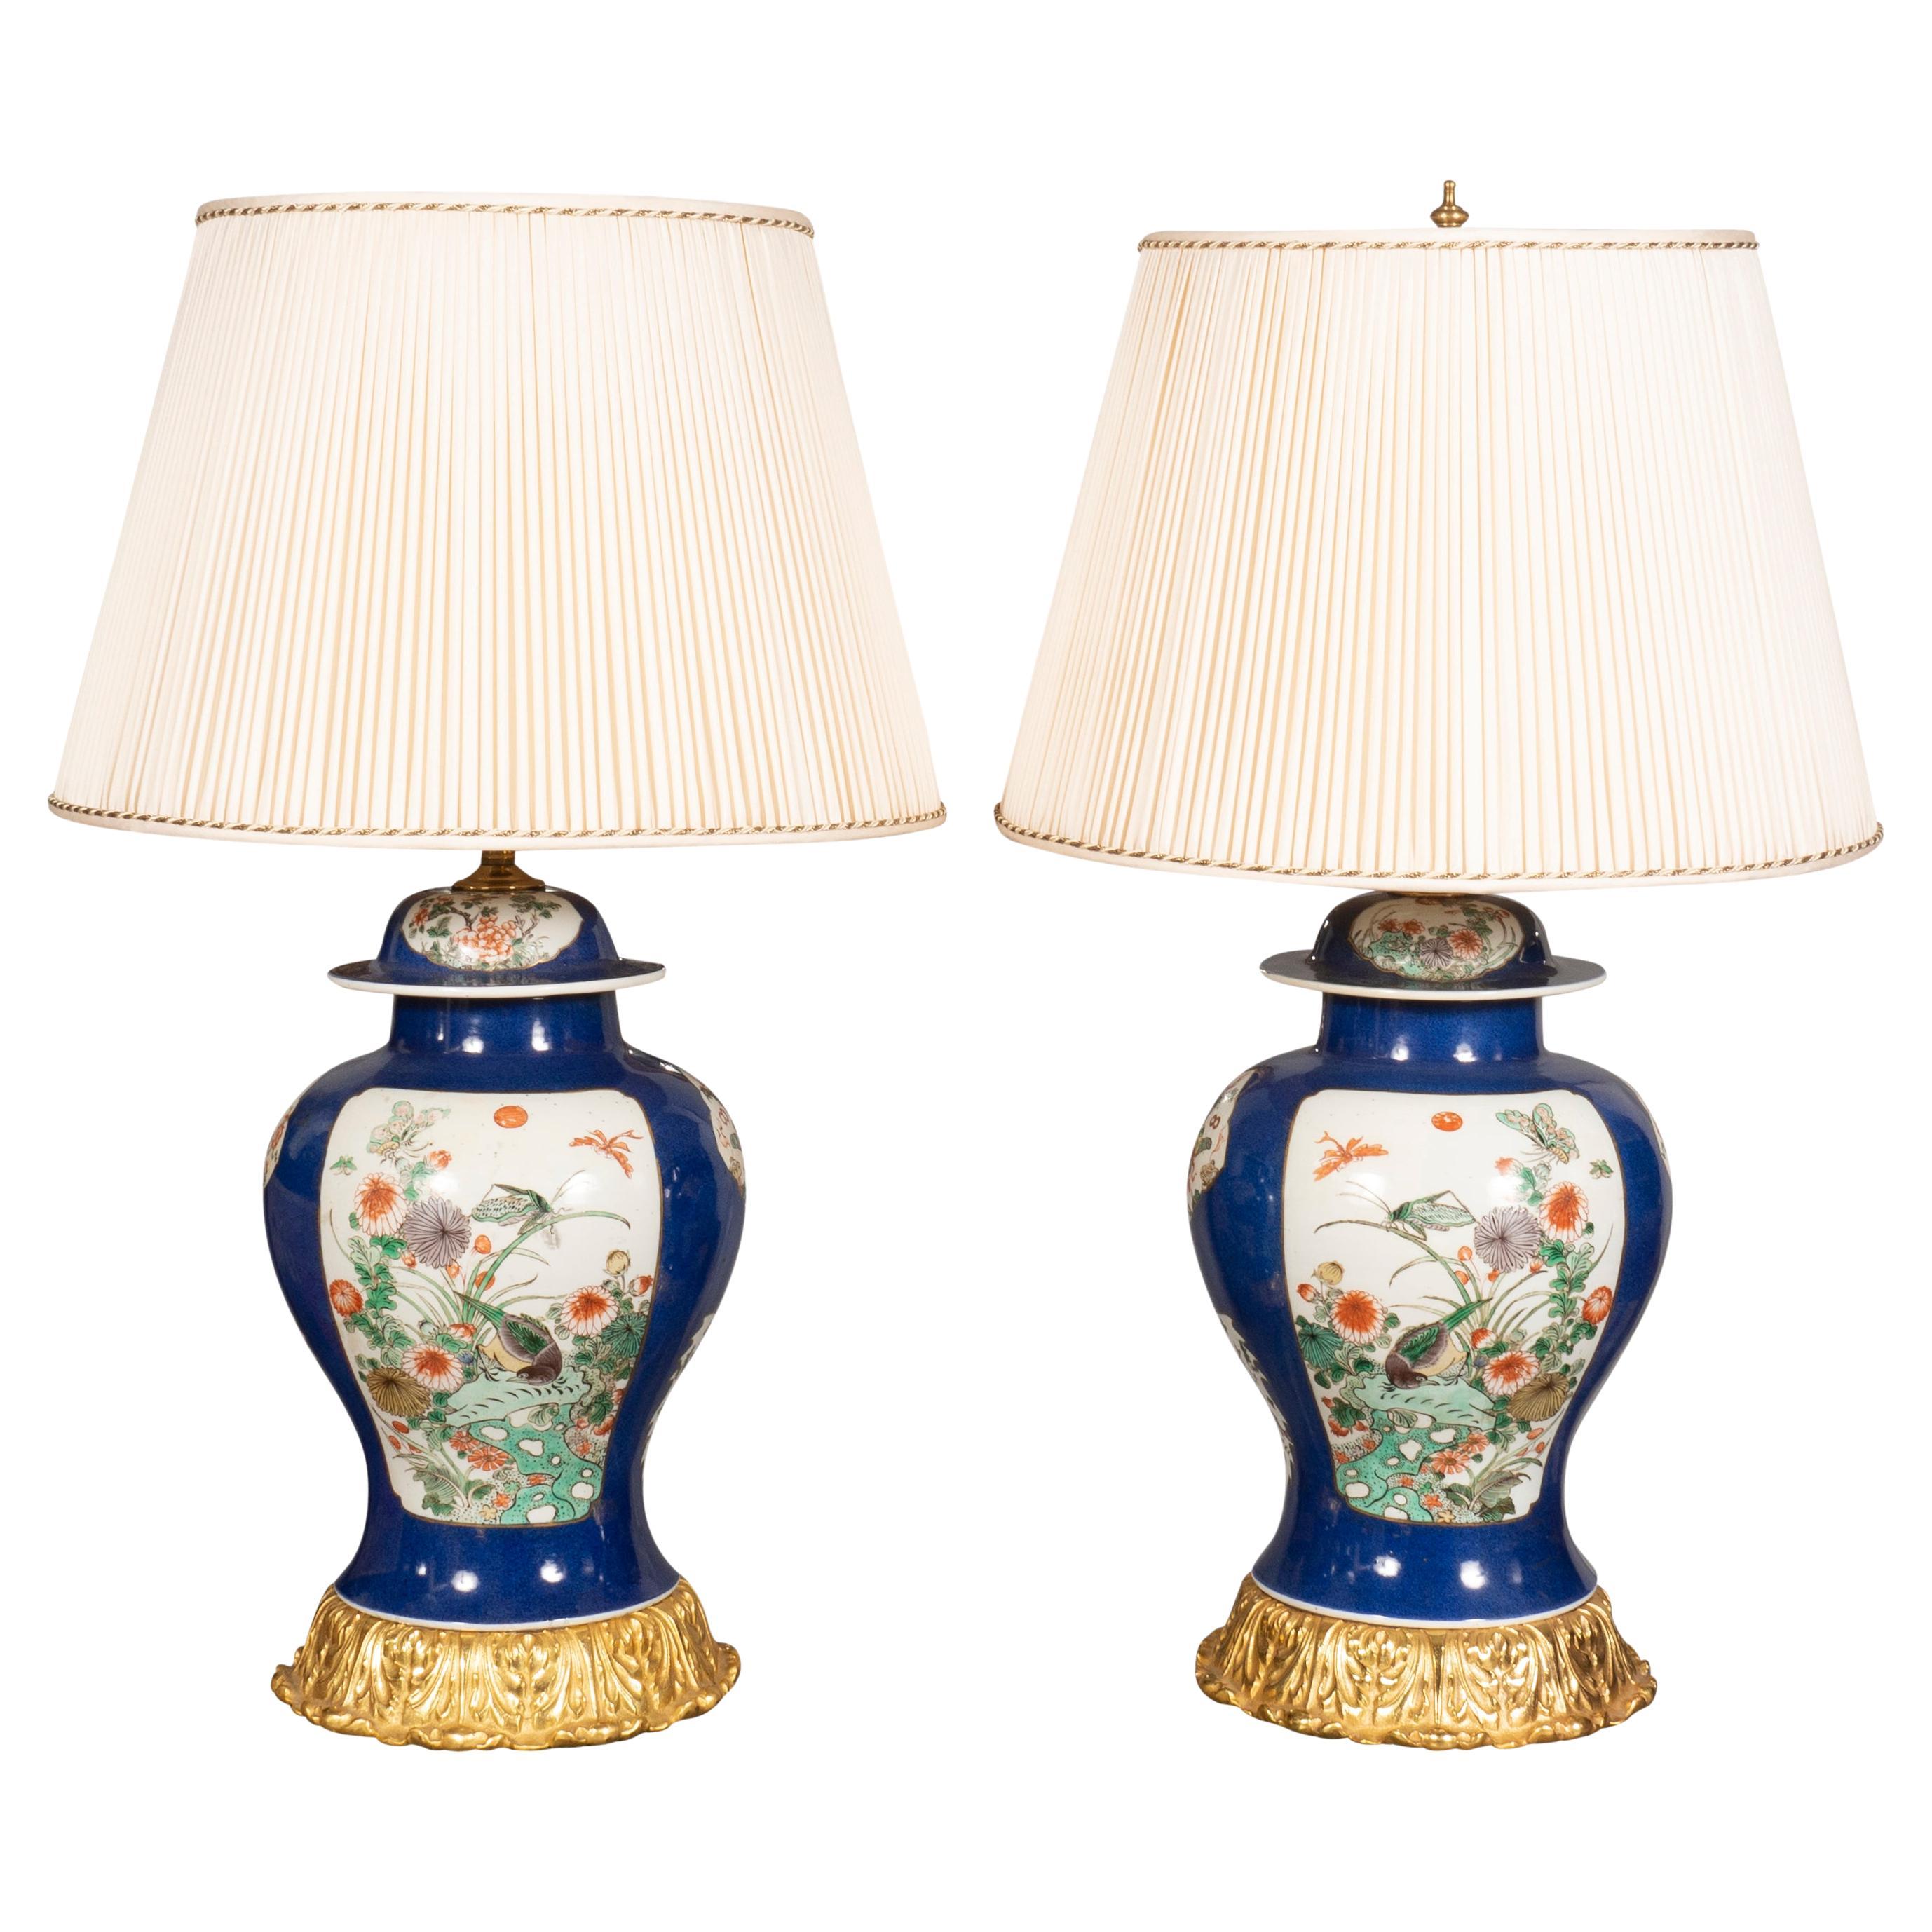 Pair of Samson Chinese Style Porcelain Table Lamps